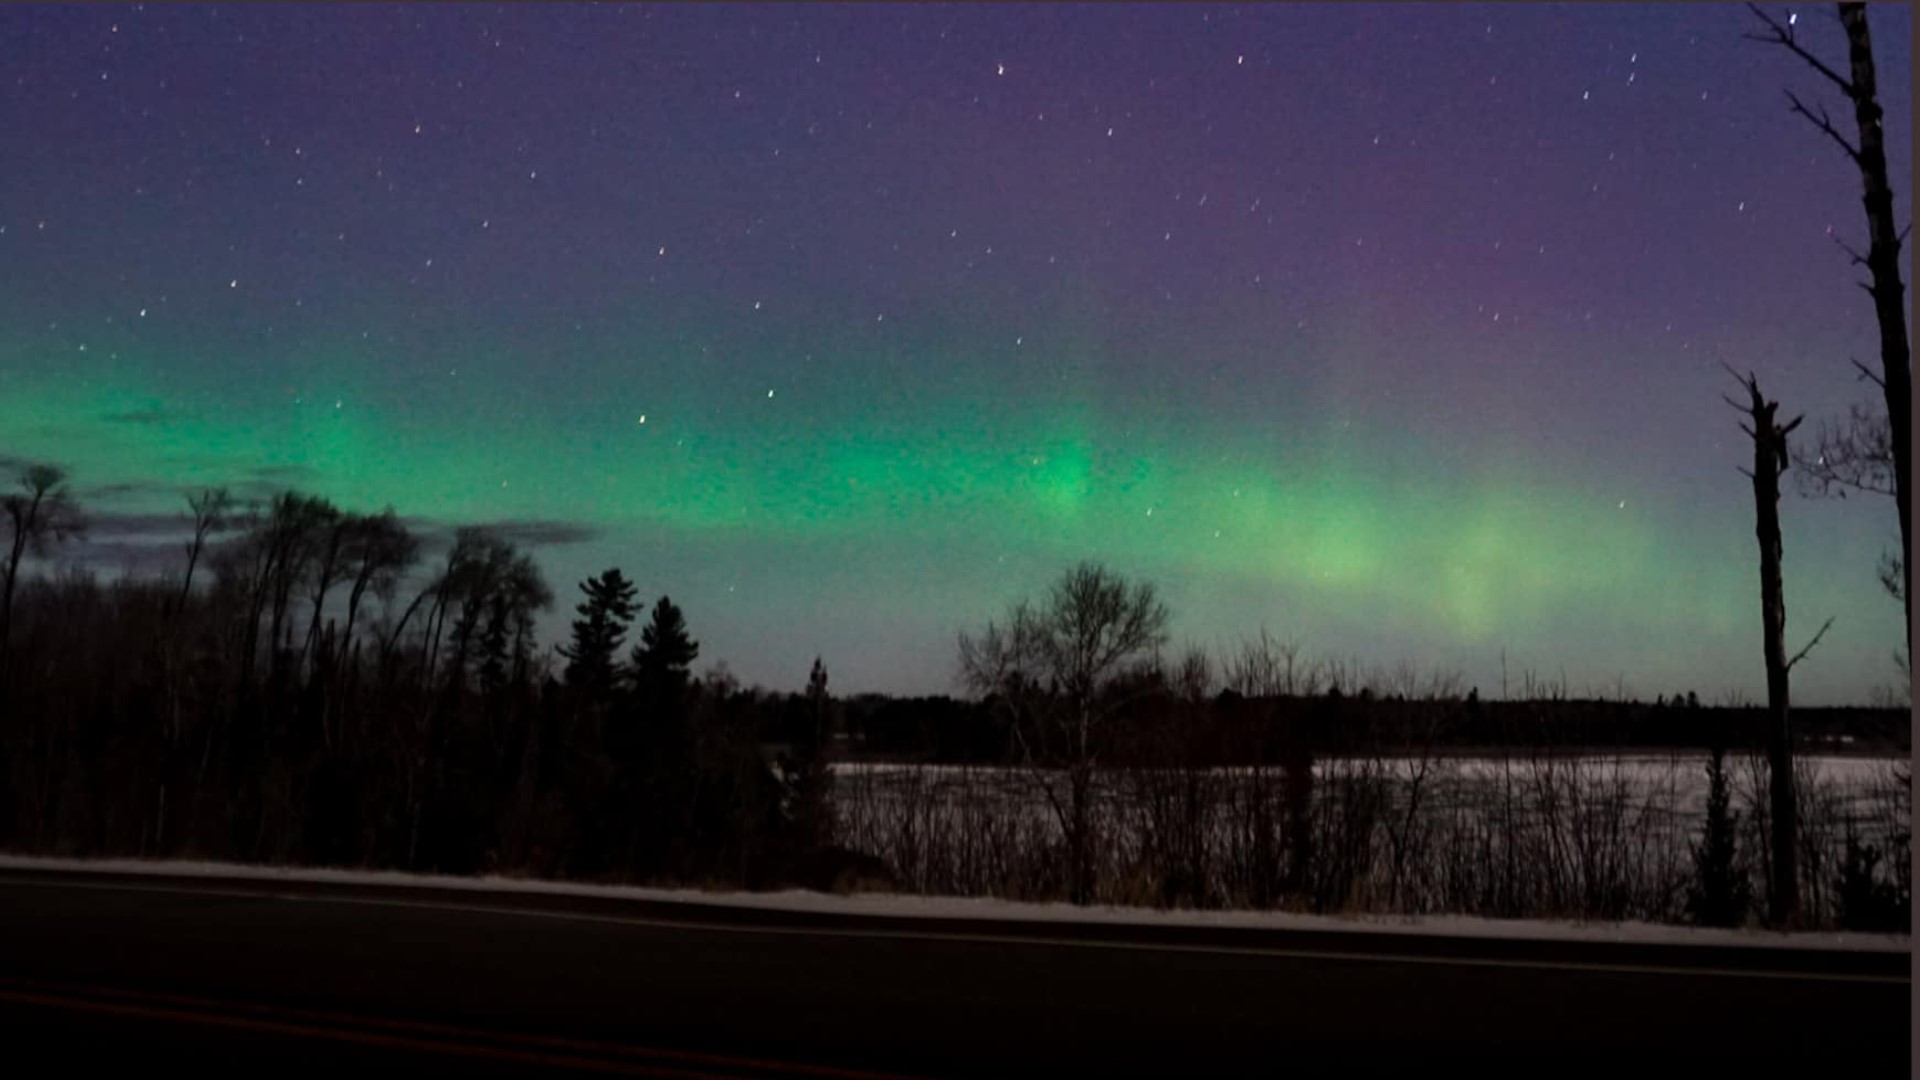 Quad Citizens have their best chance of seeing the Northern Lights in years on the night of May 10, as a strong solar storm brings the display to the skies.